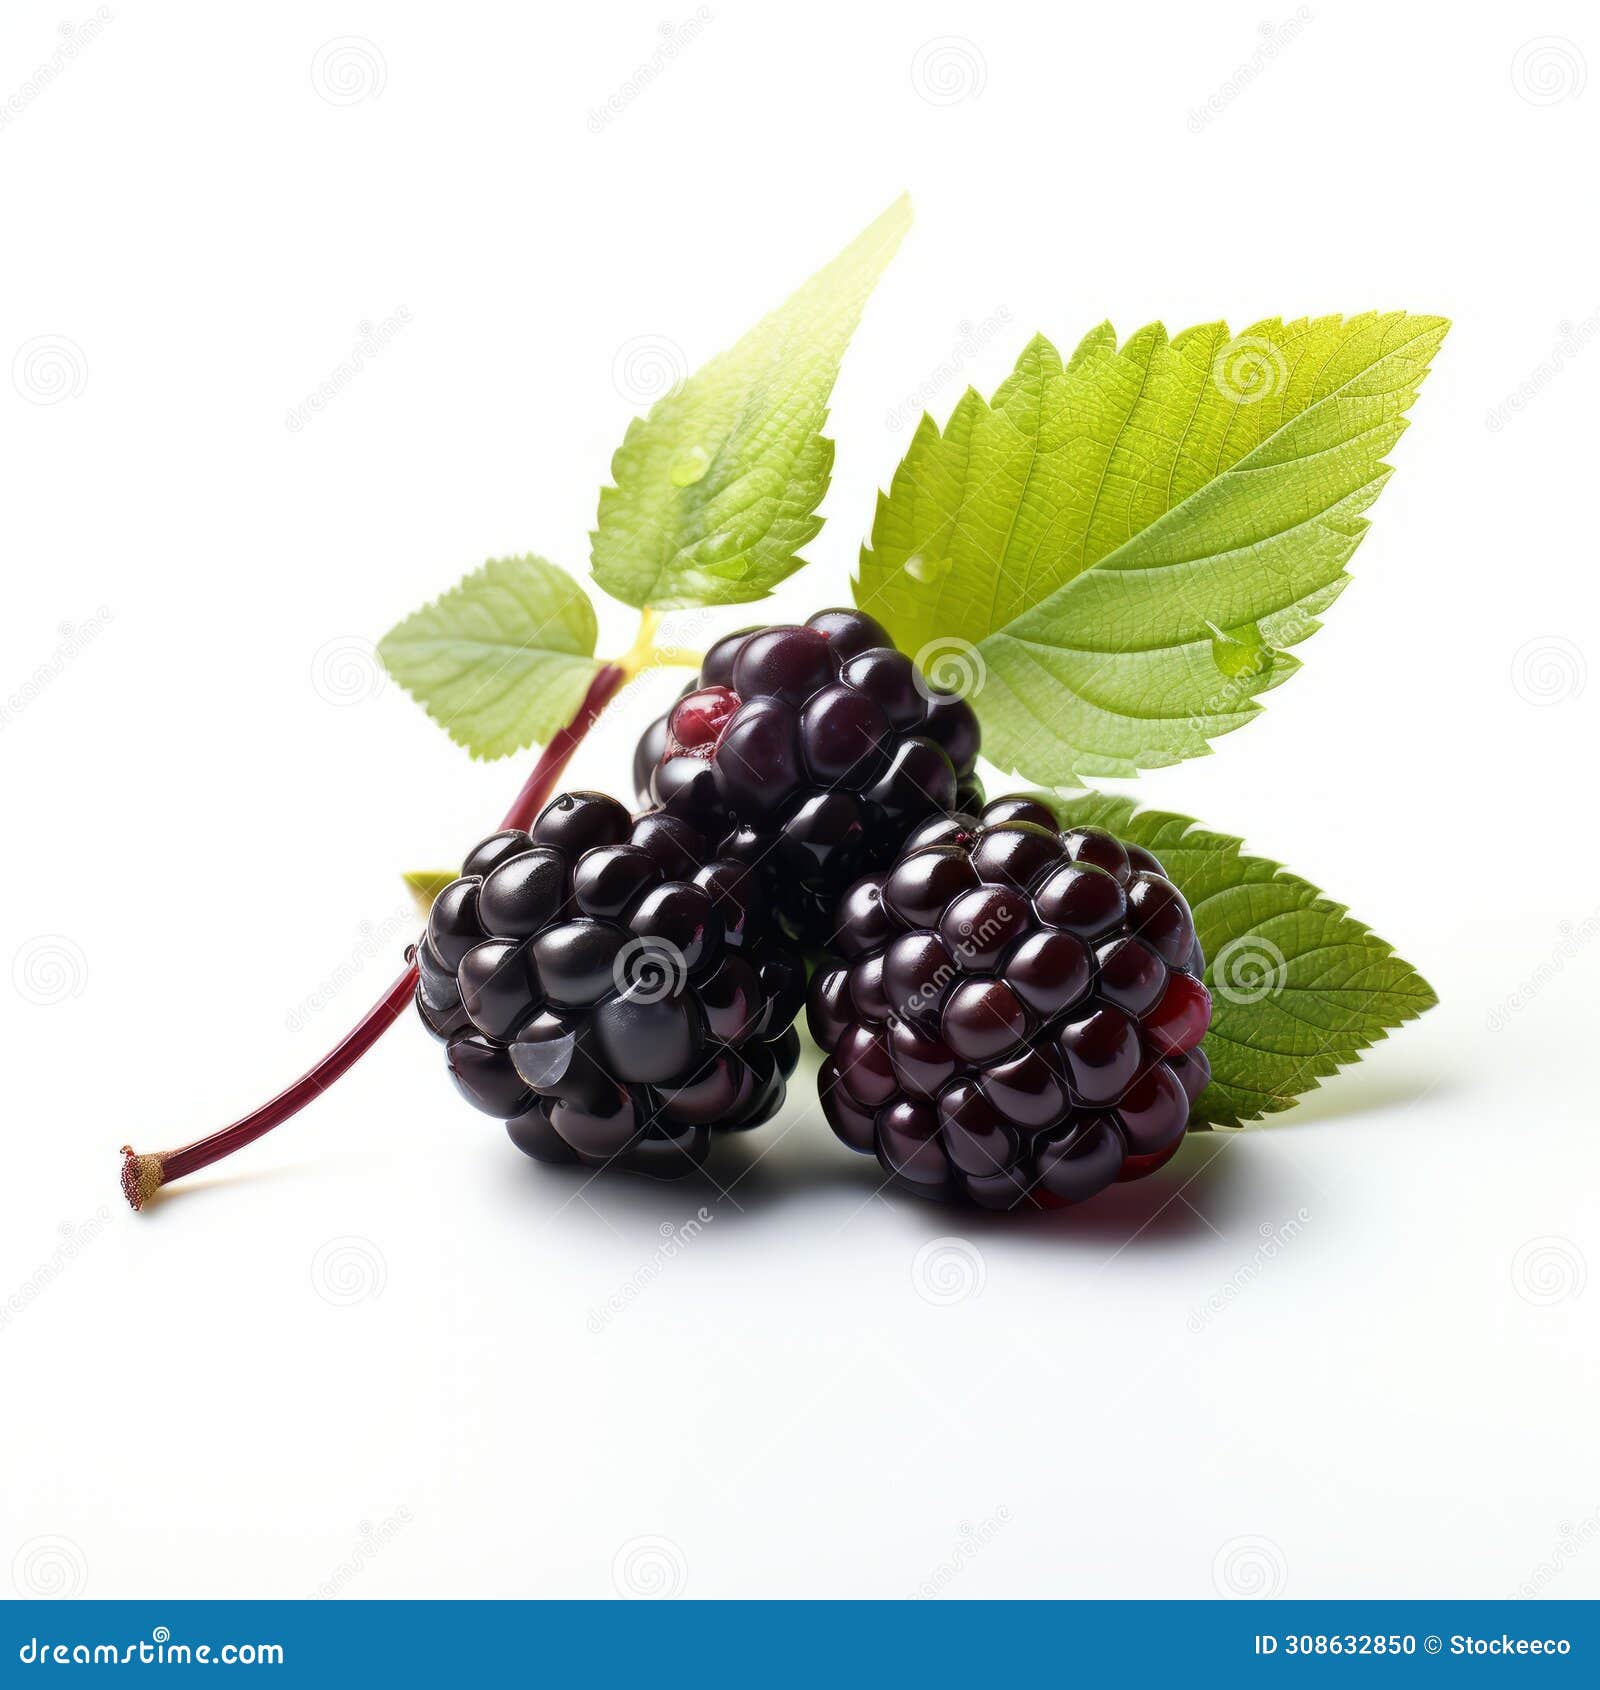 stunning blackberry rendering with white background